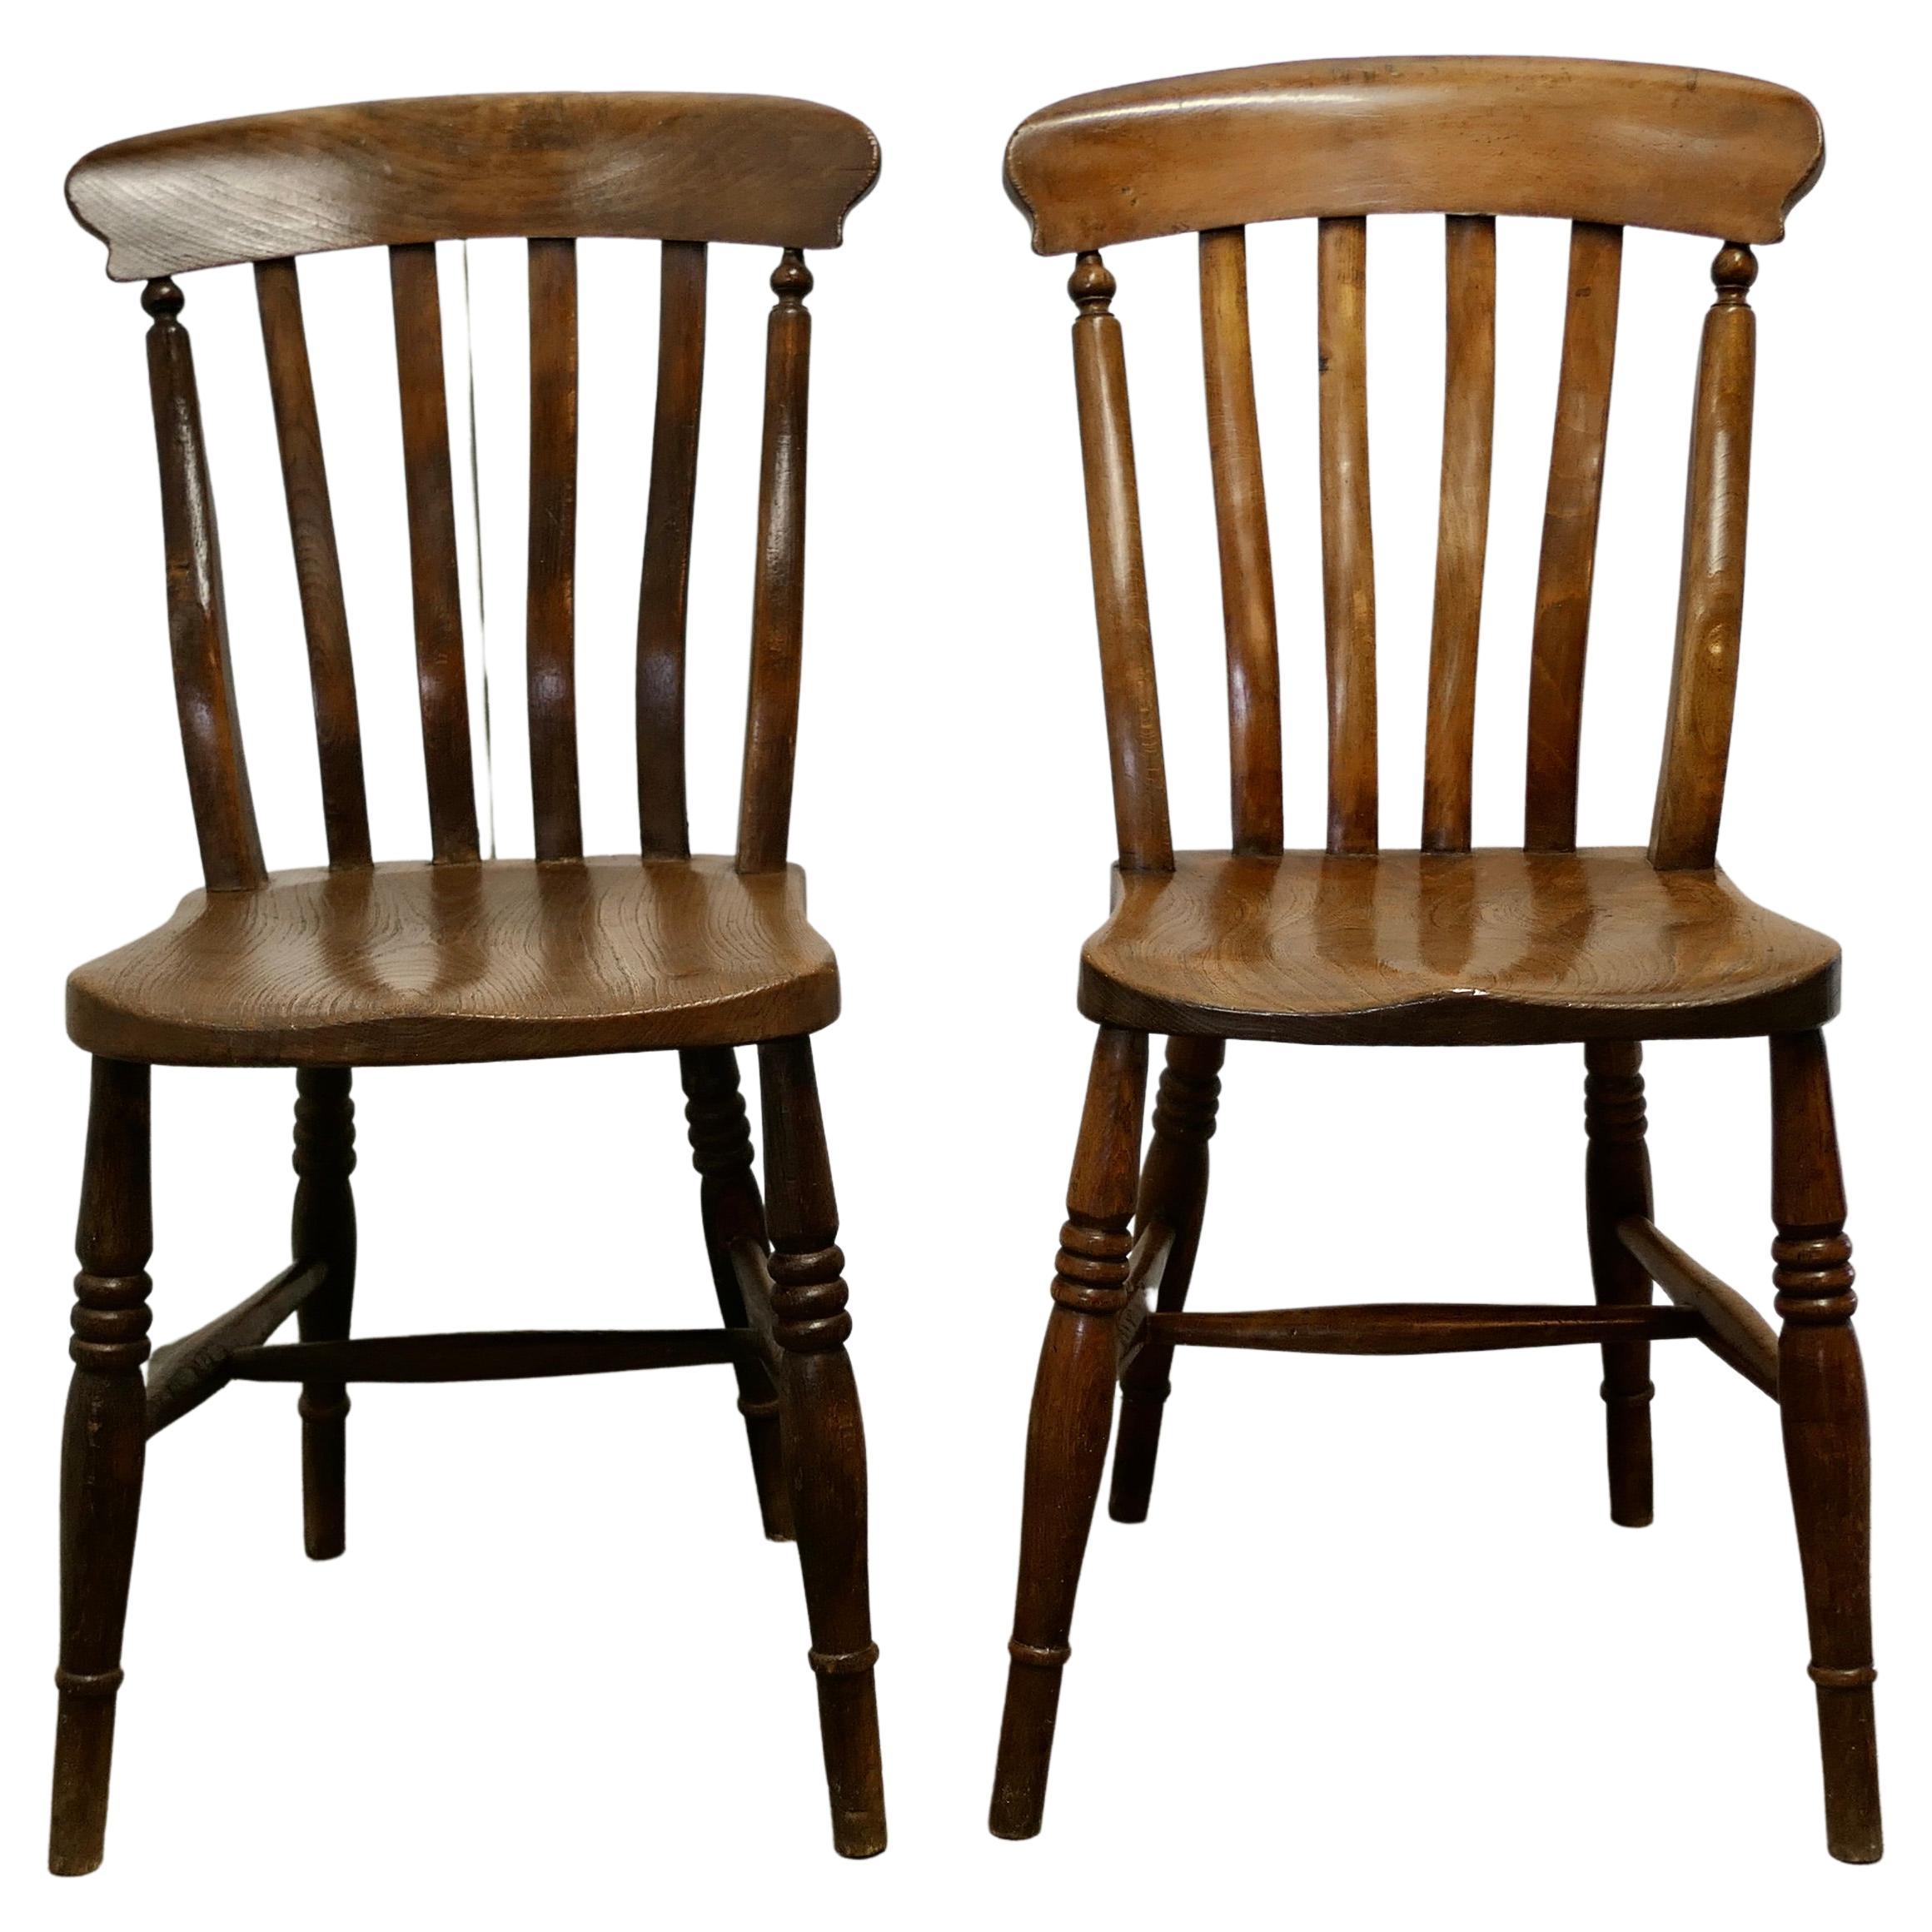 Pair of Victorian Slat Back Farmhouse Kitchen Chairs